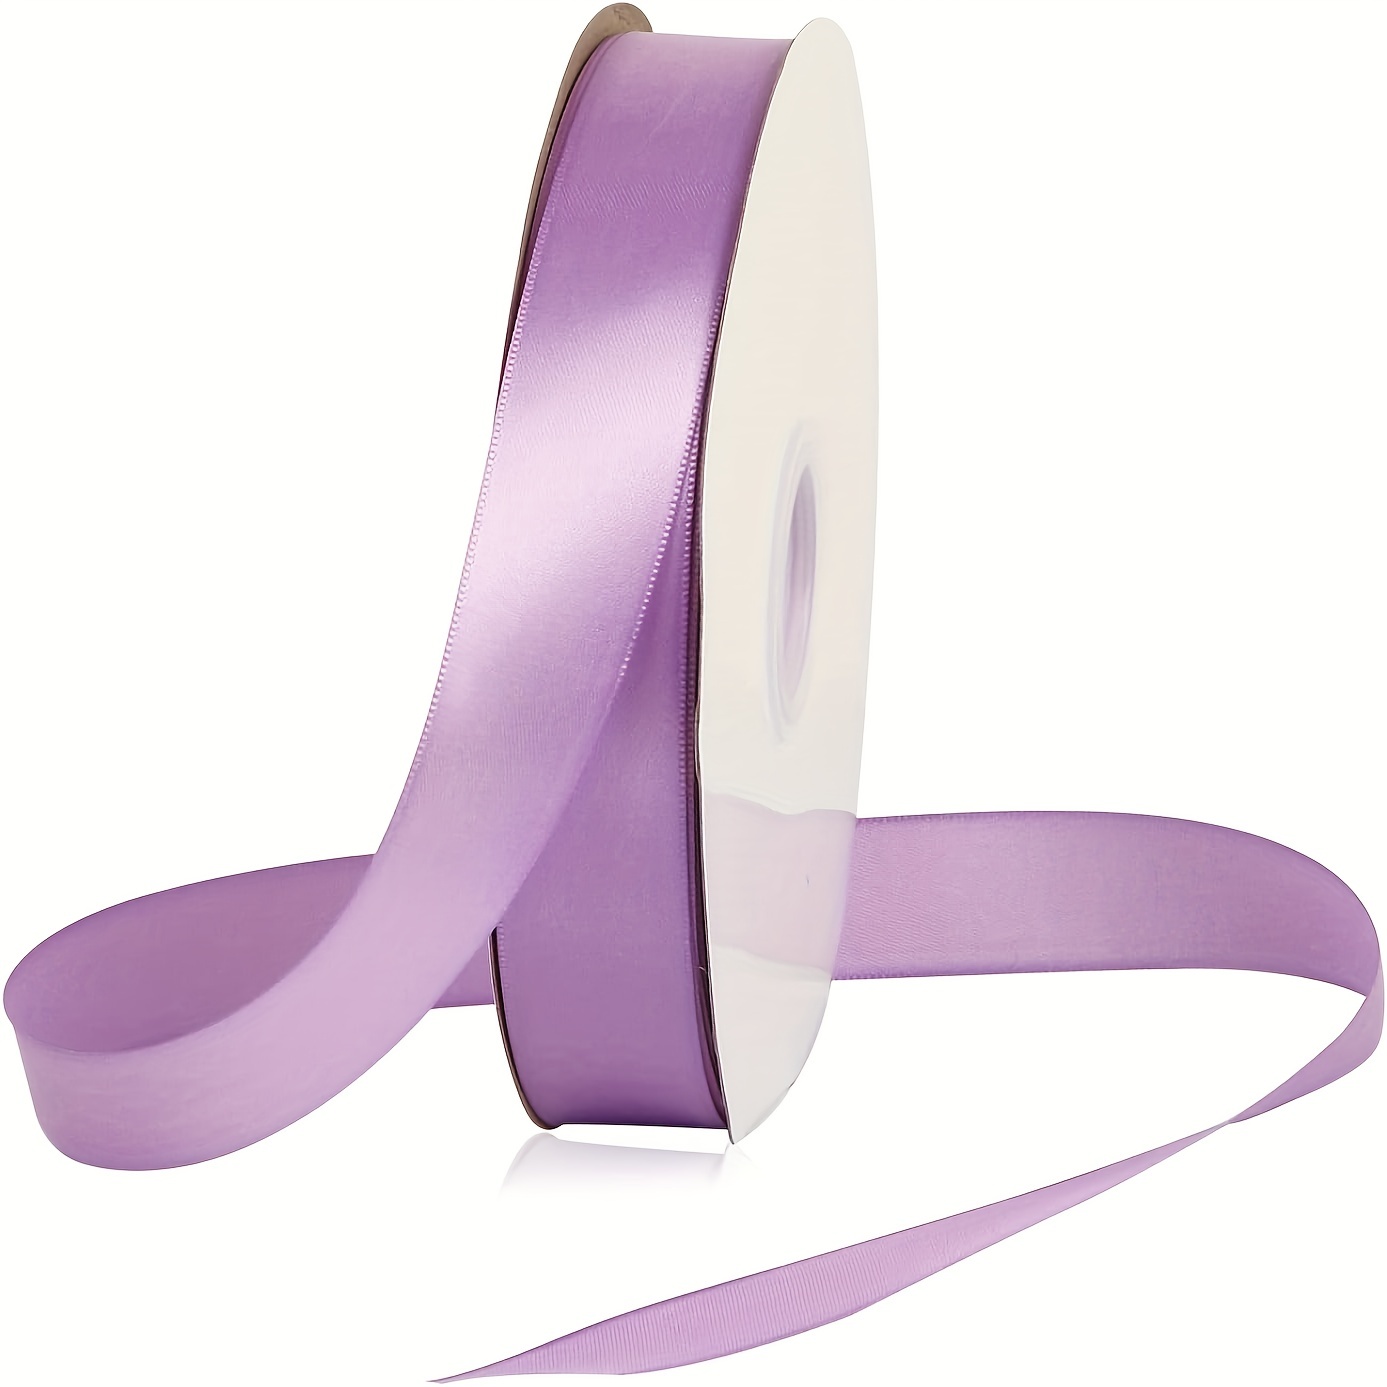 1 1/2 Inch Lavender Polyester Satin Ribbon for Gift Wrapping, 100 Yards  High Density Craft Fabric Ribbon for Wedding, Gift Wrapping, Holiday